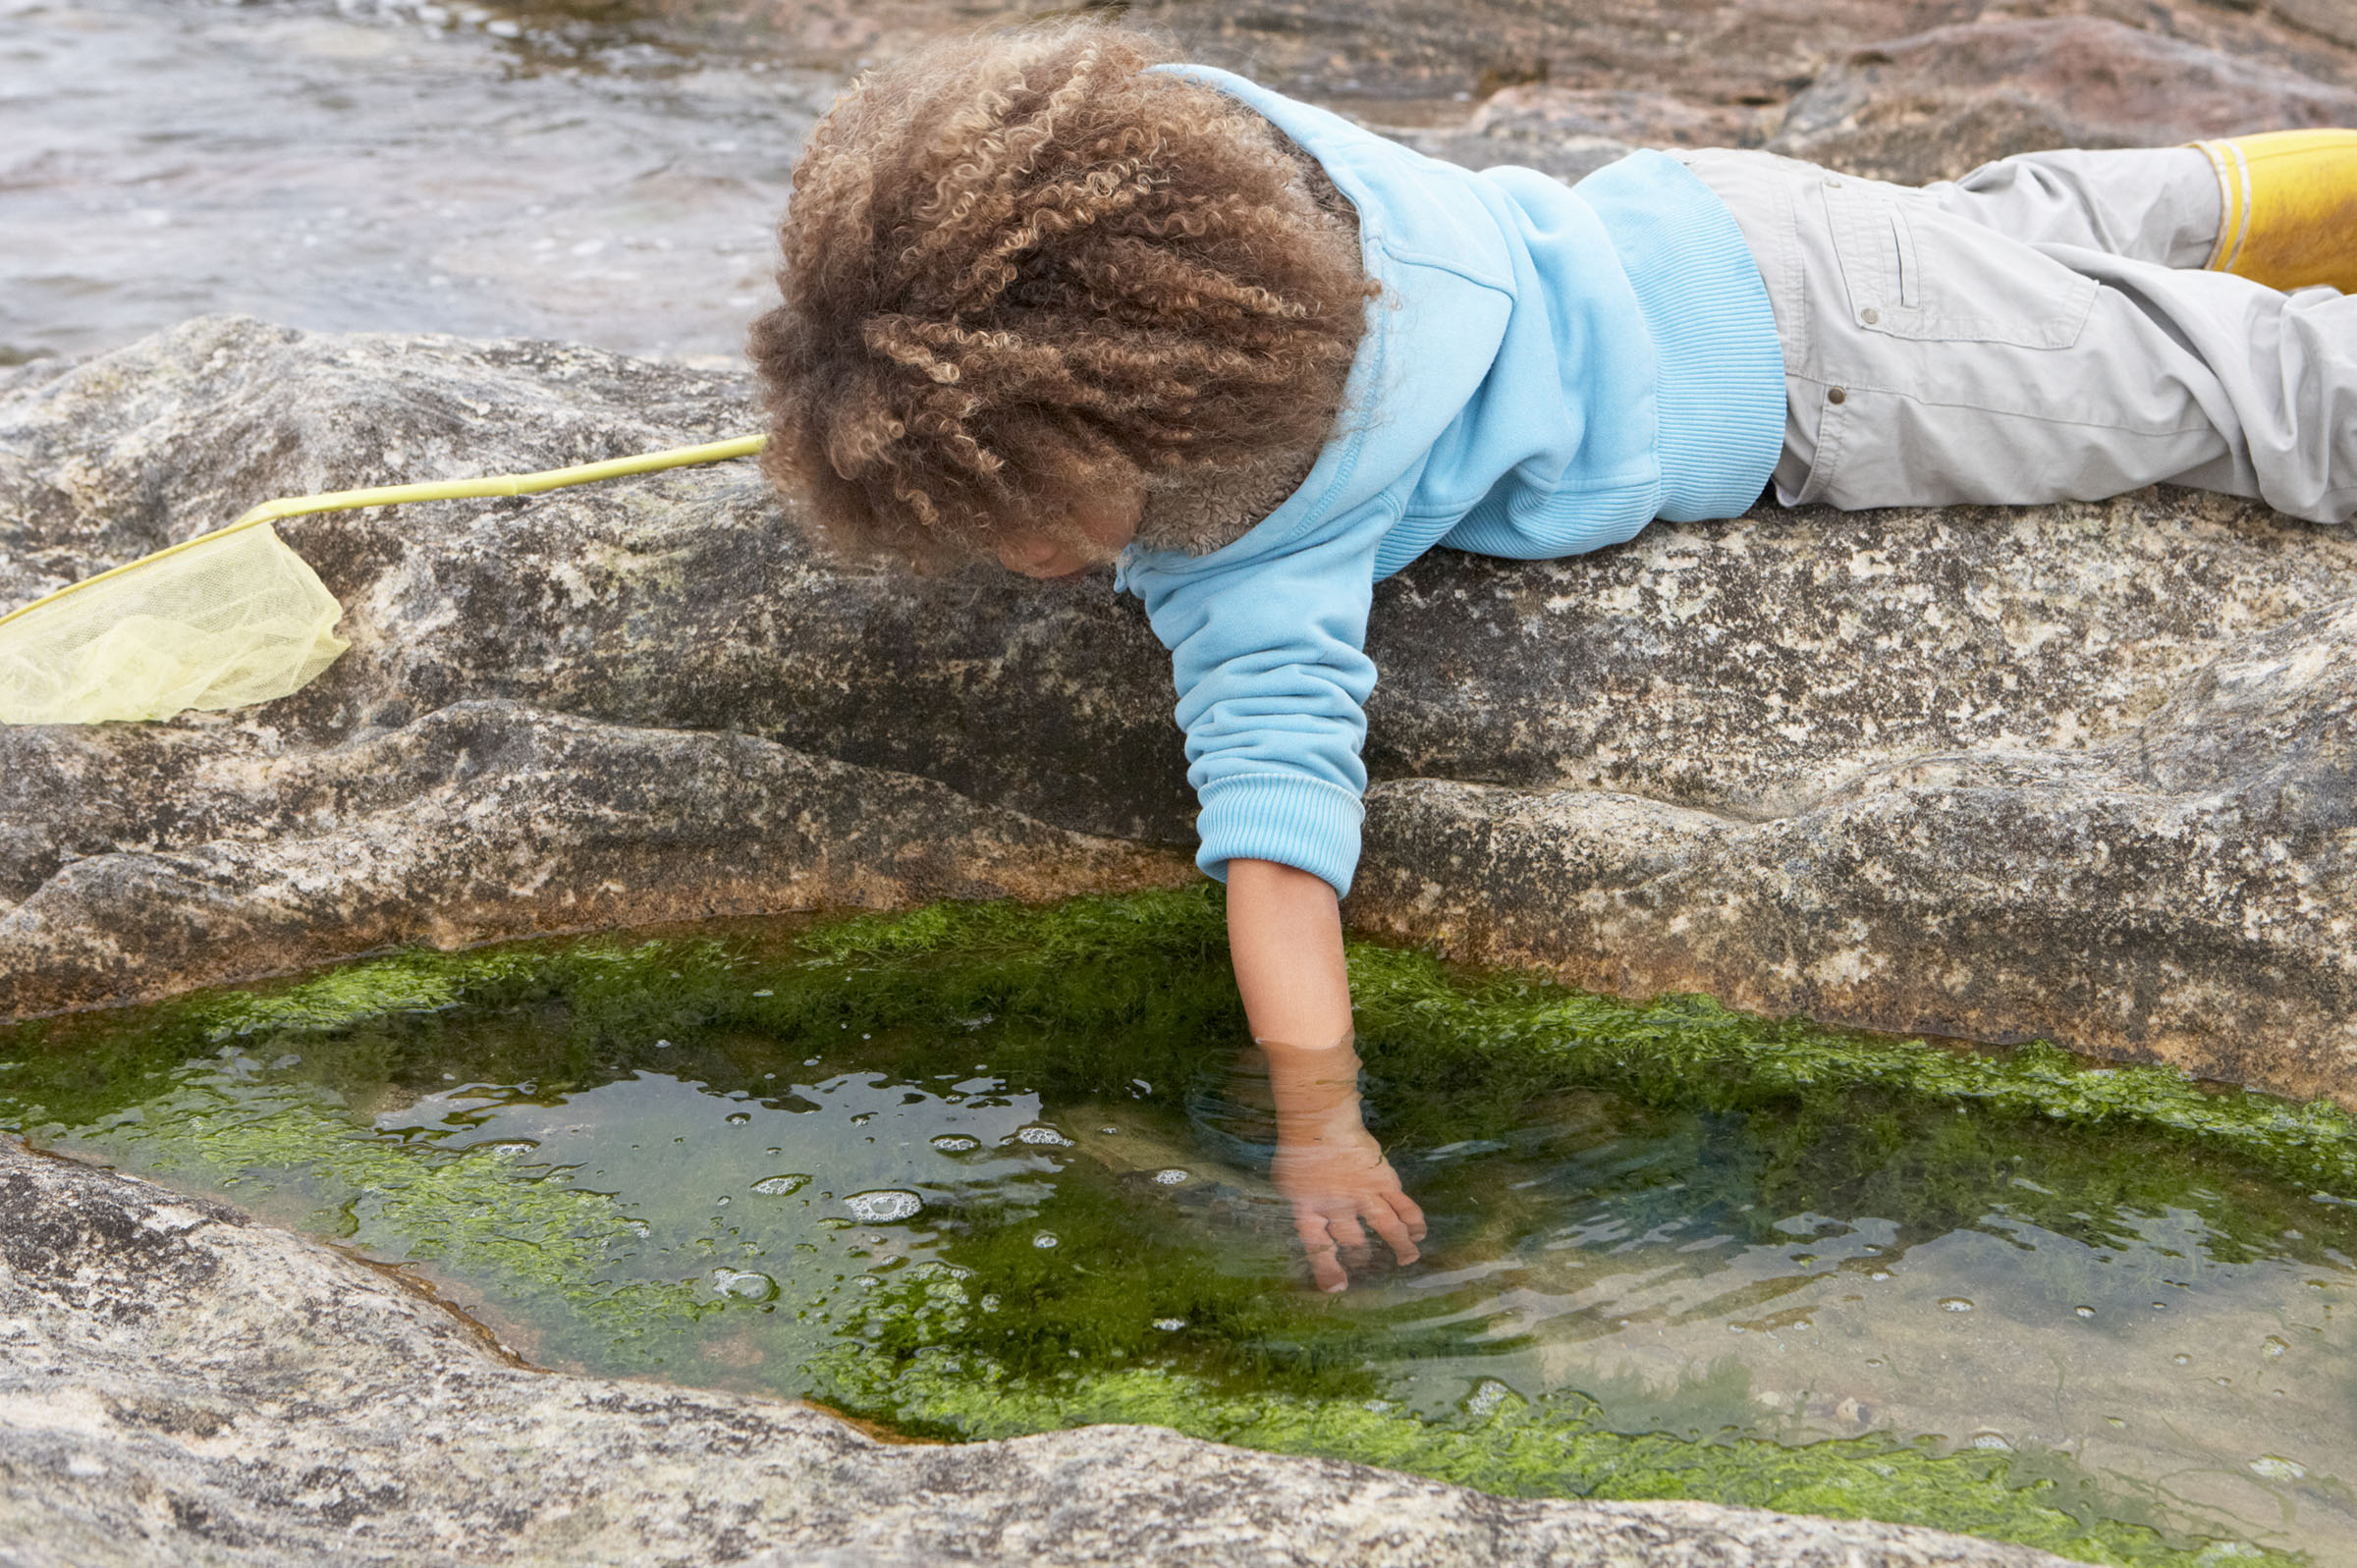 How many different creatures live in a rock pool?